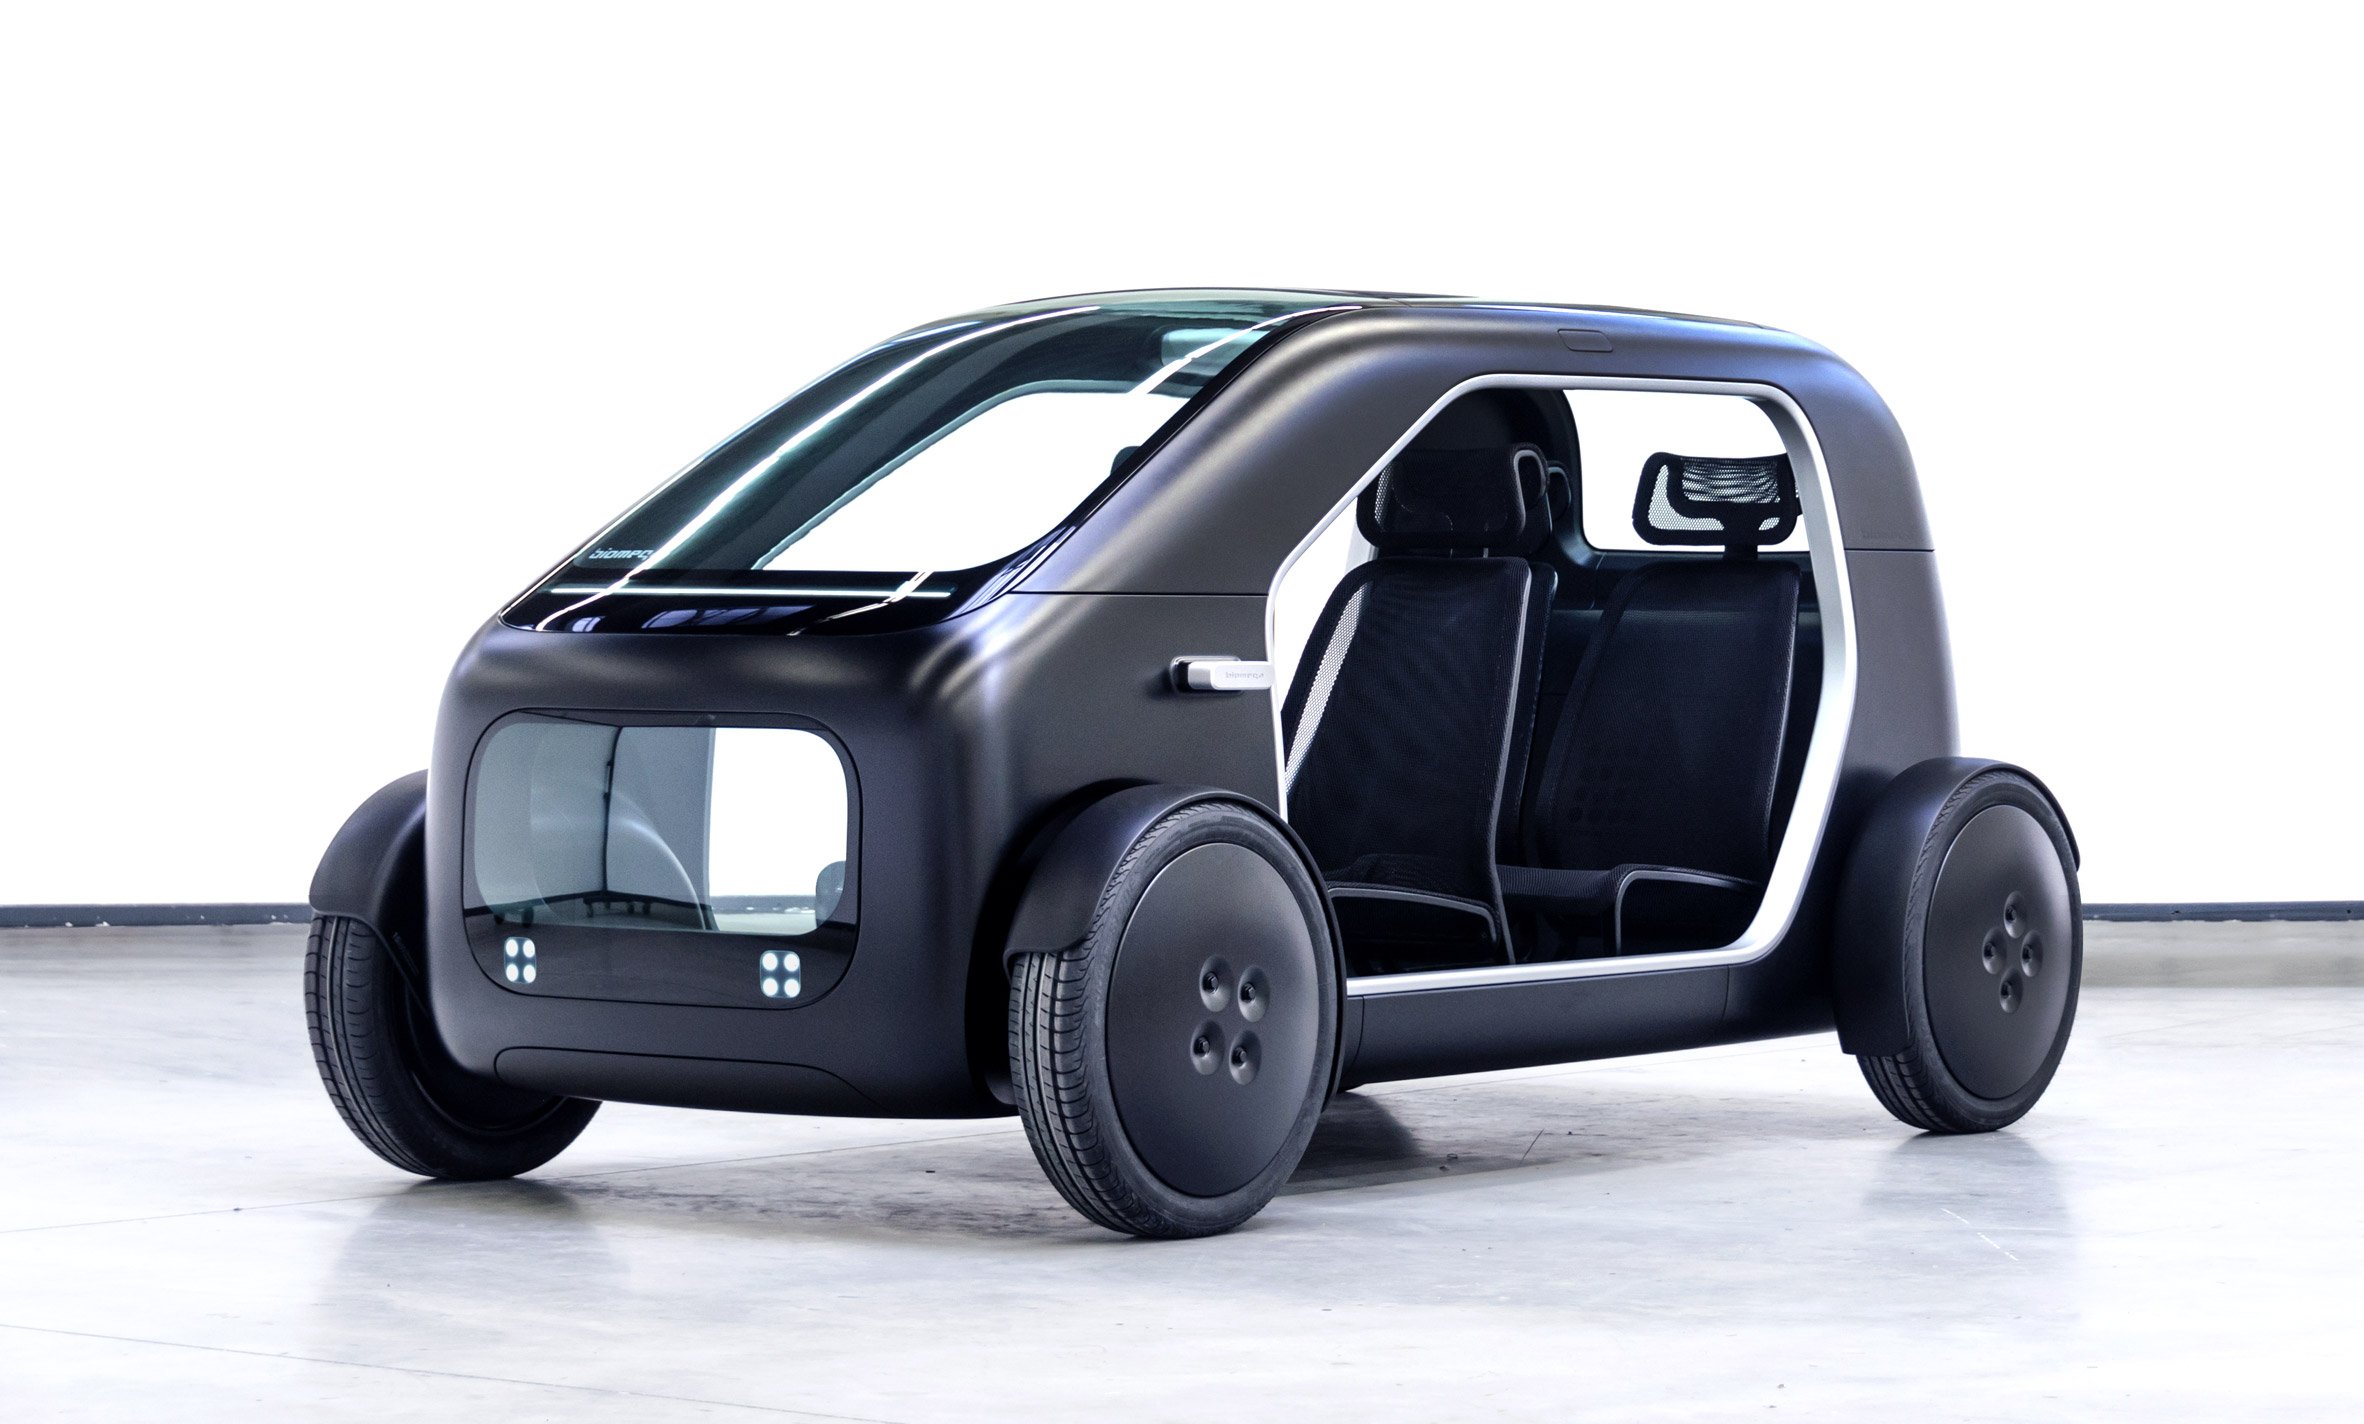 SIN is a Biomega electric car that is low-cost and low-weight